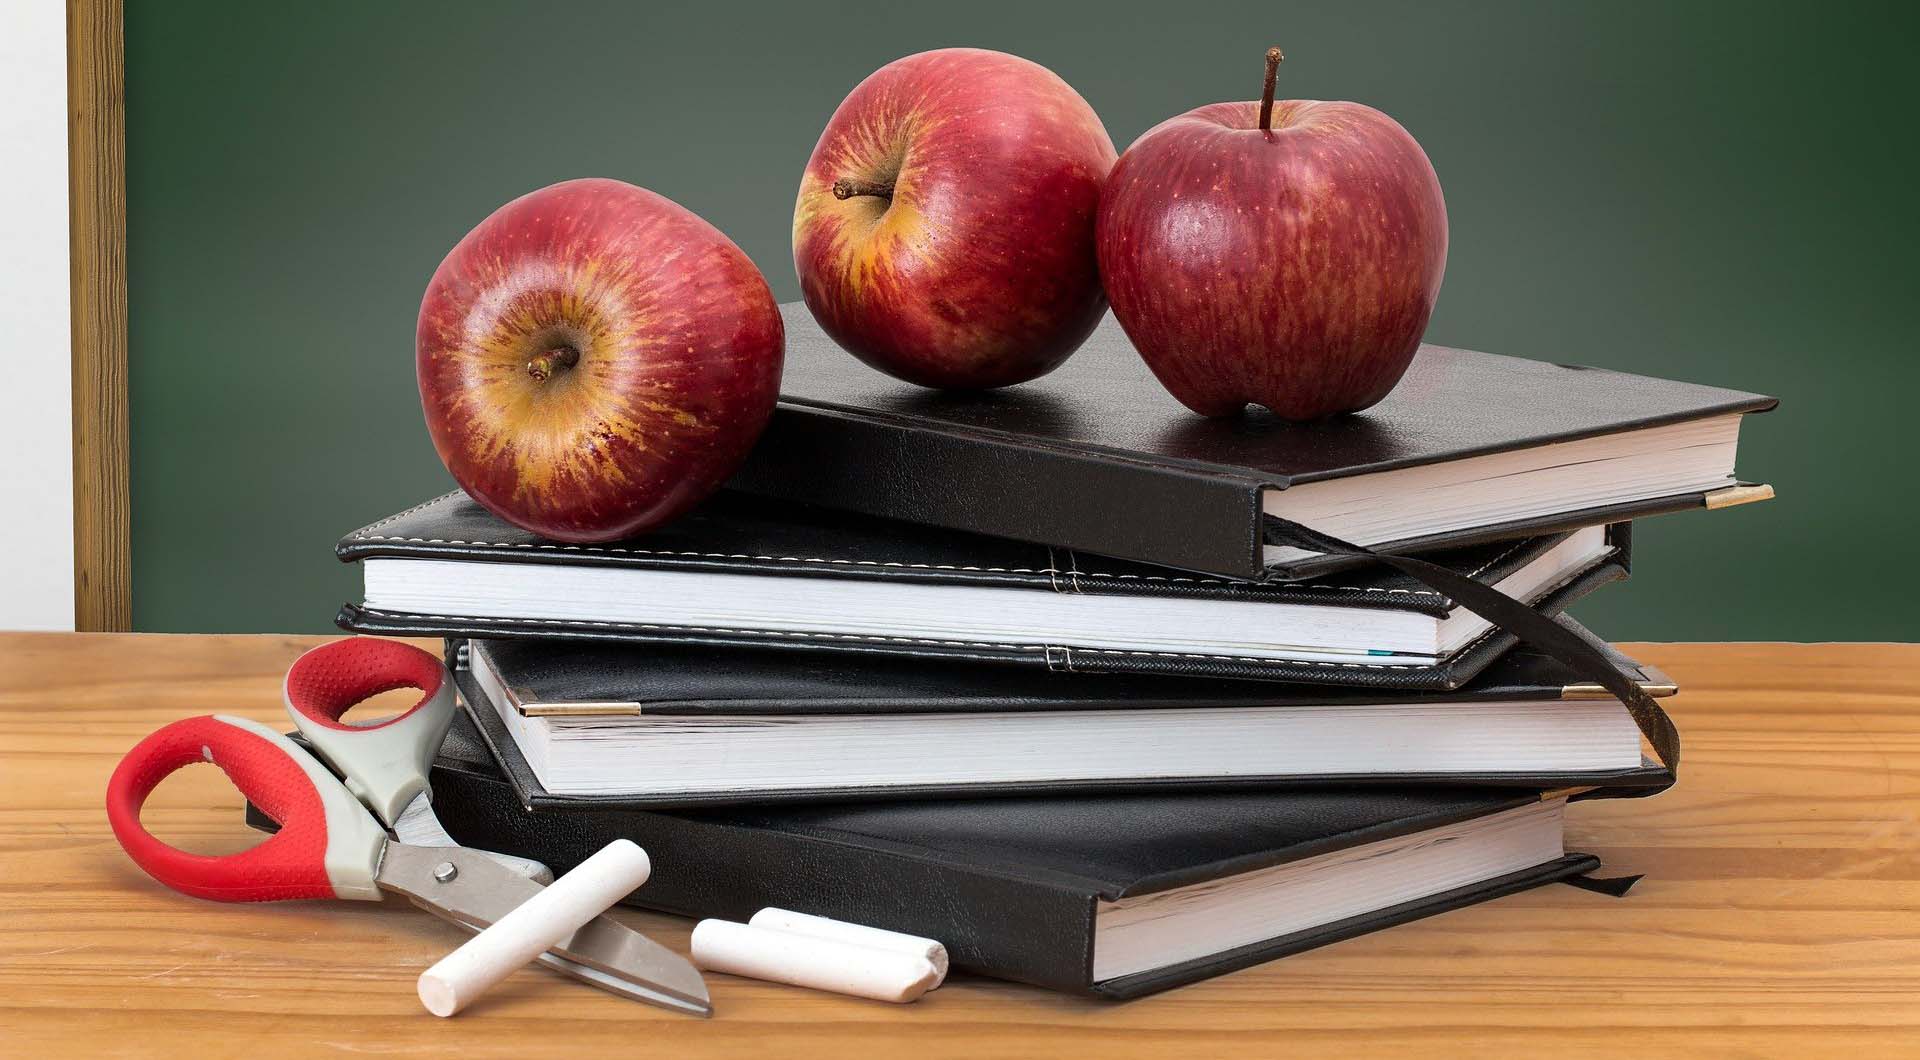 Apples and classroom supplies (Photo by Steve Buissinne / Pixabay.)